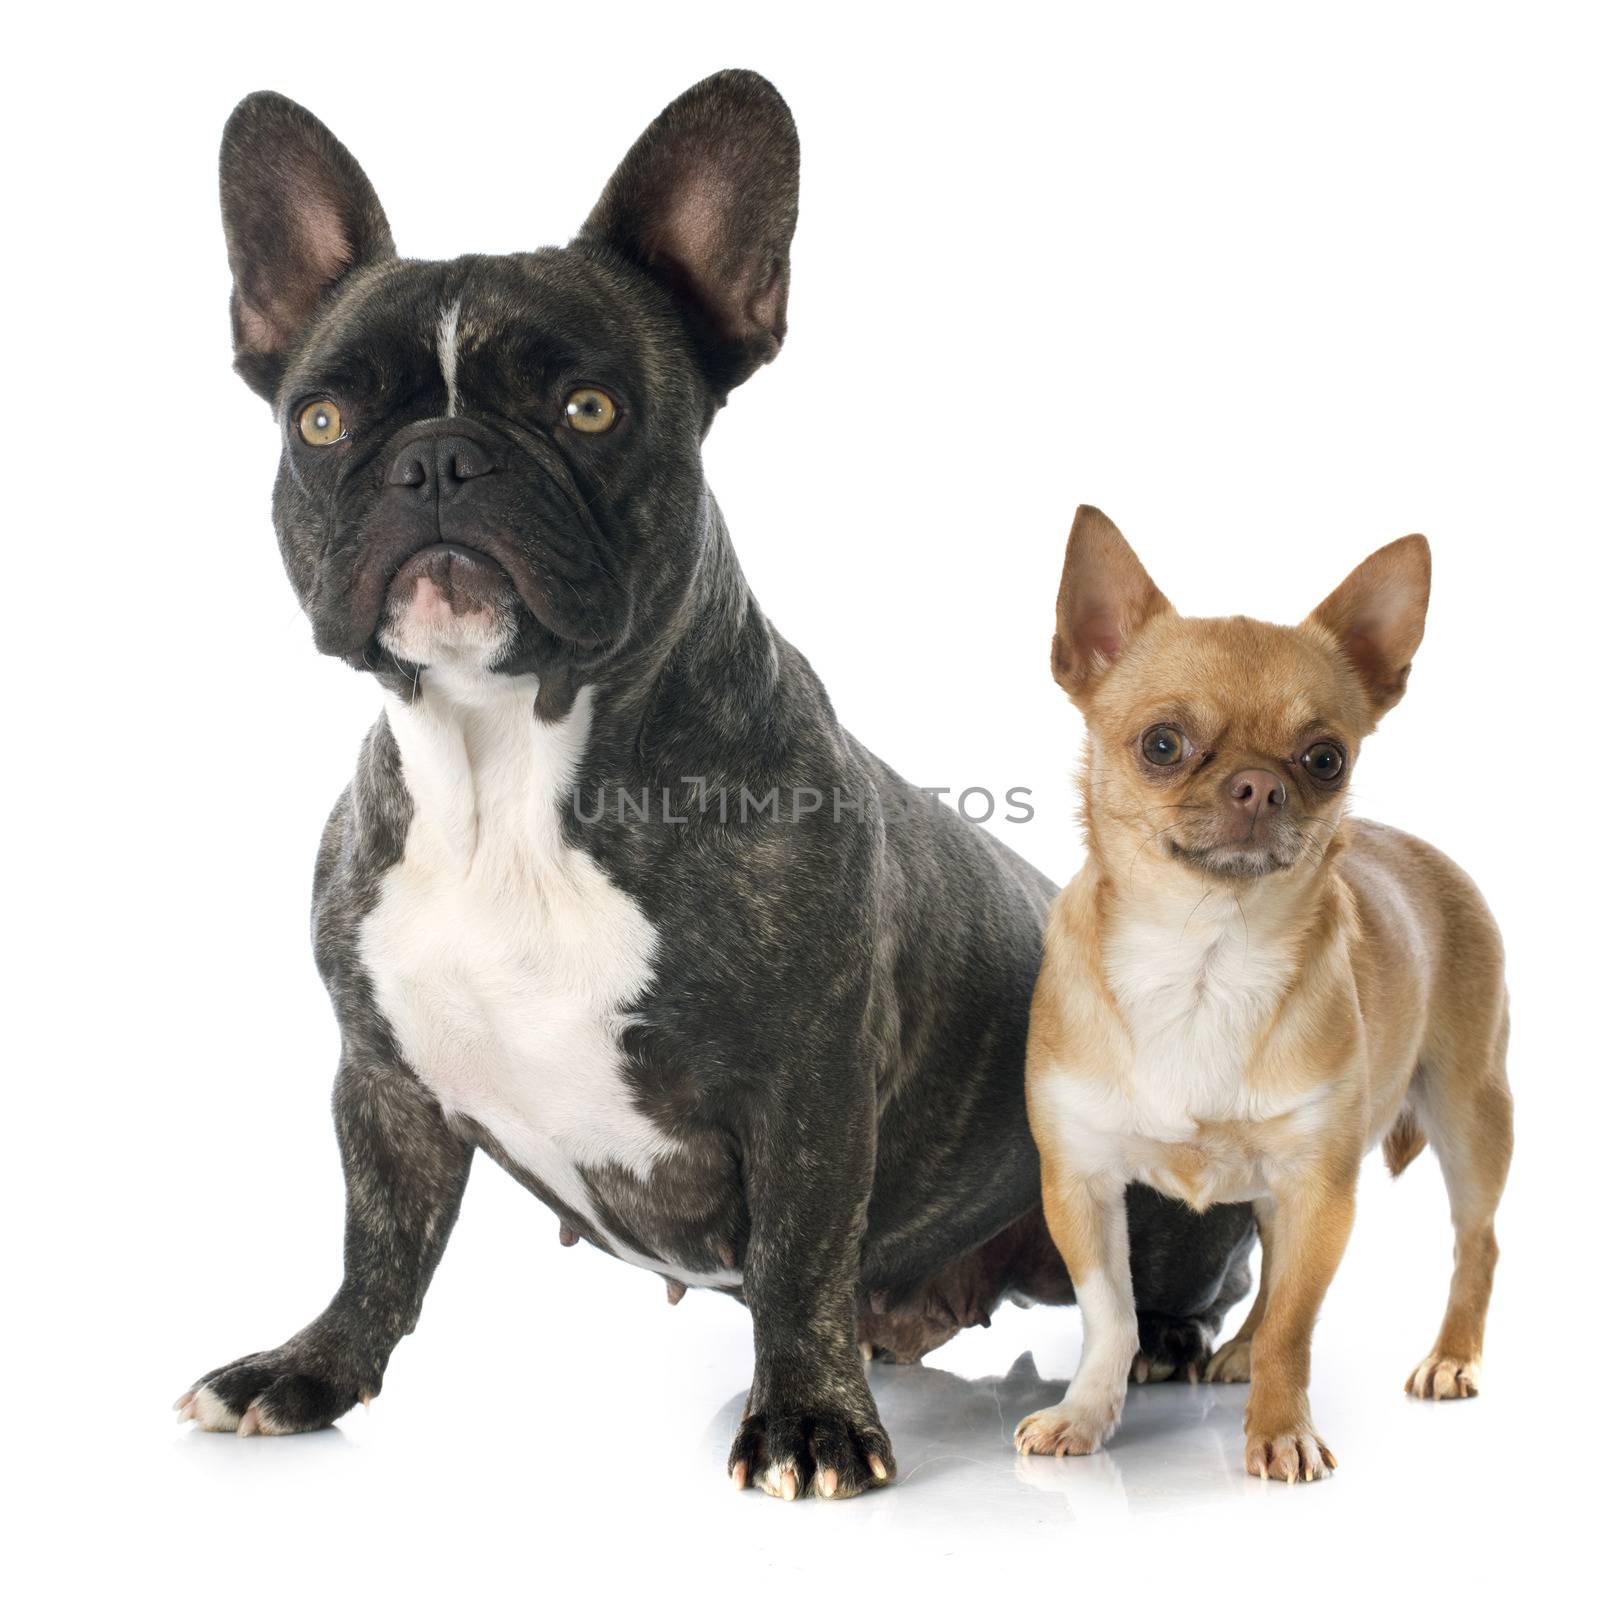 portrait of a purebred french bulldogand chihuahua in front of white background